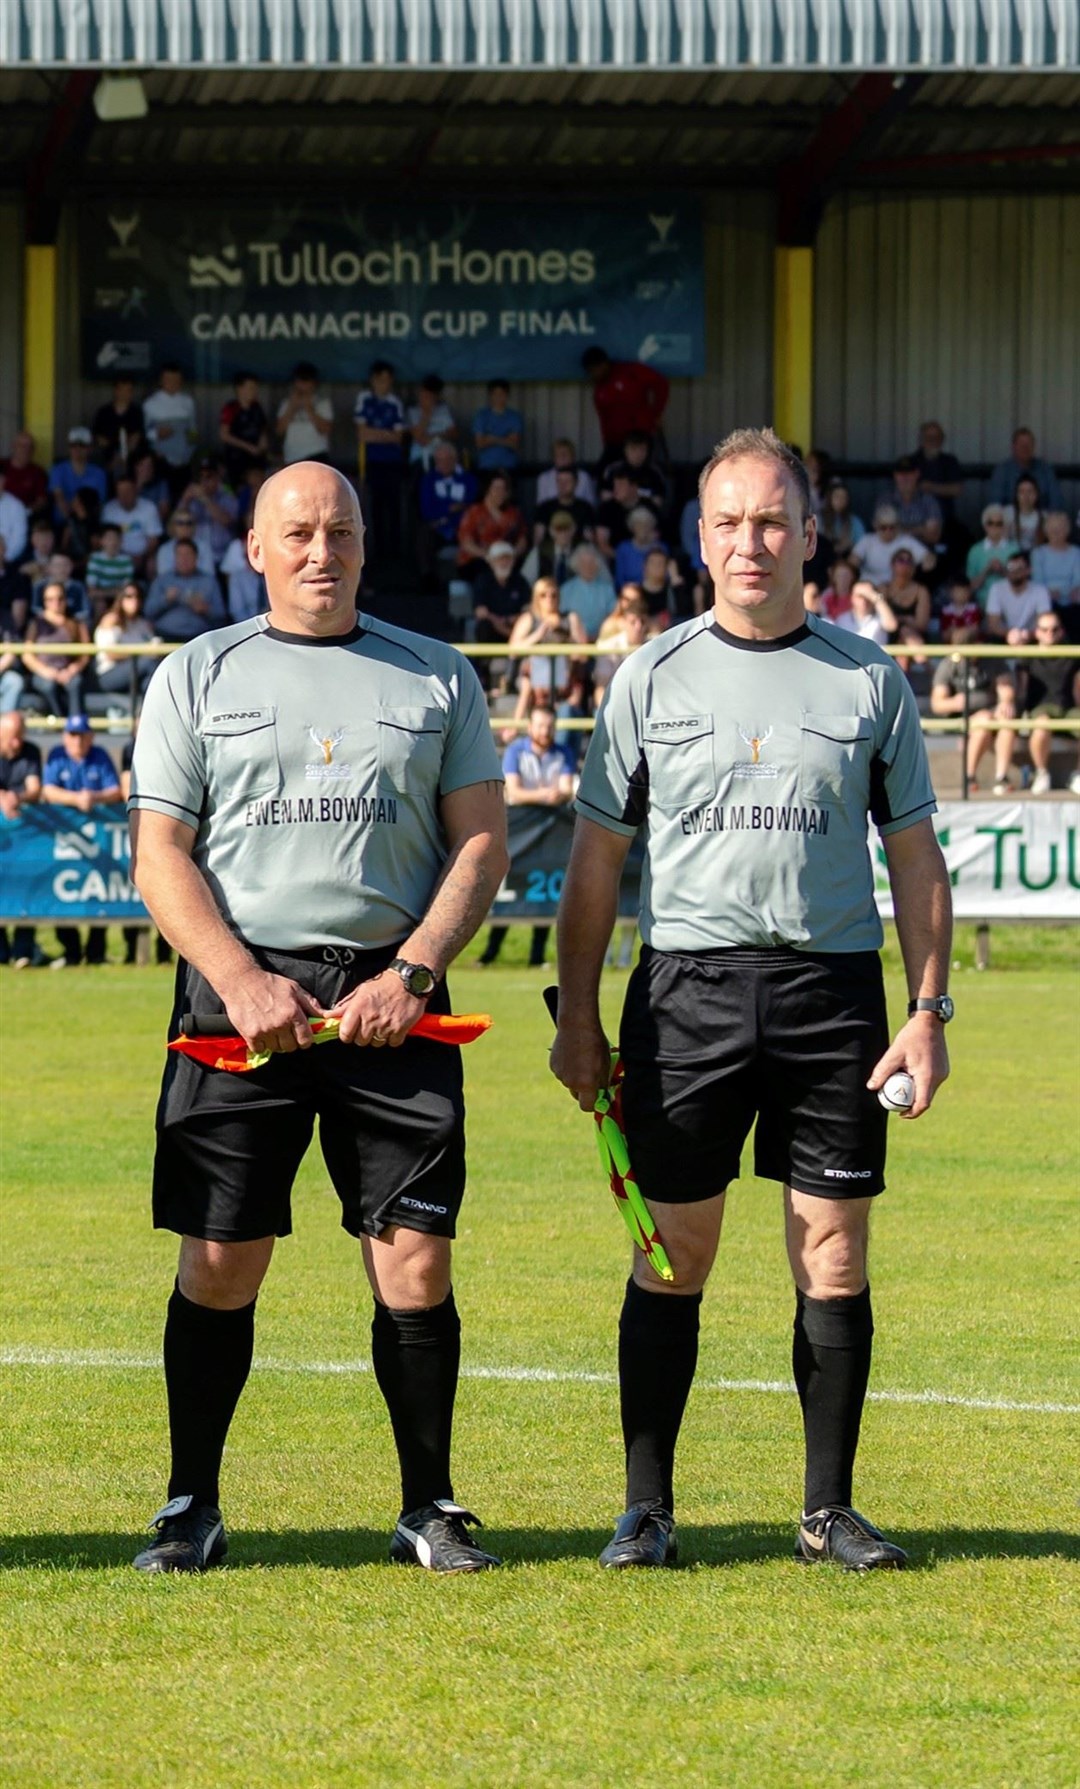 2023 Tulloch Homes Camanachd Cup Final Referee Des McNulty (right) pictured ahead of officiating as part of Robert Baxter’s team in the 2019 final.